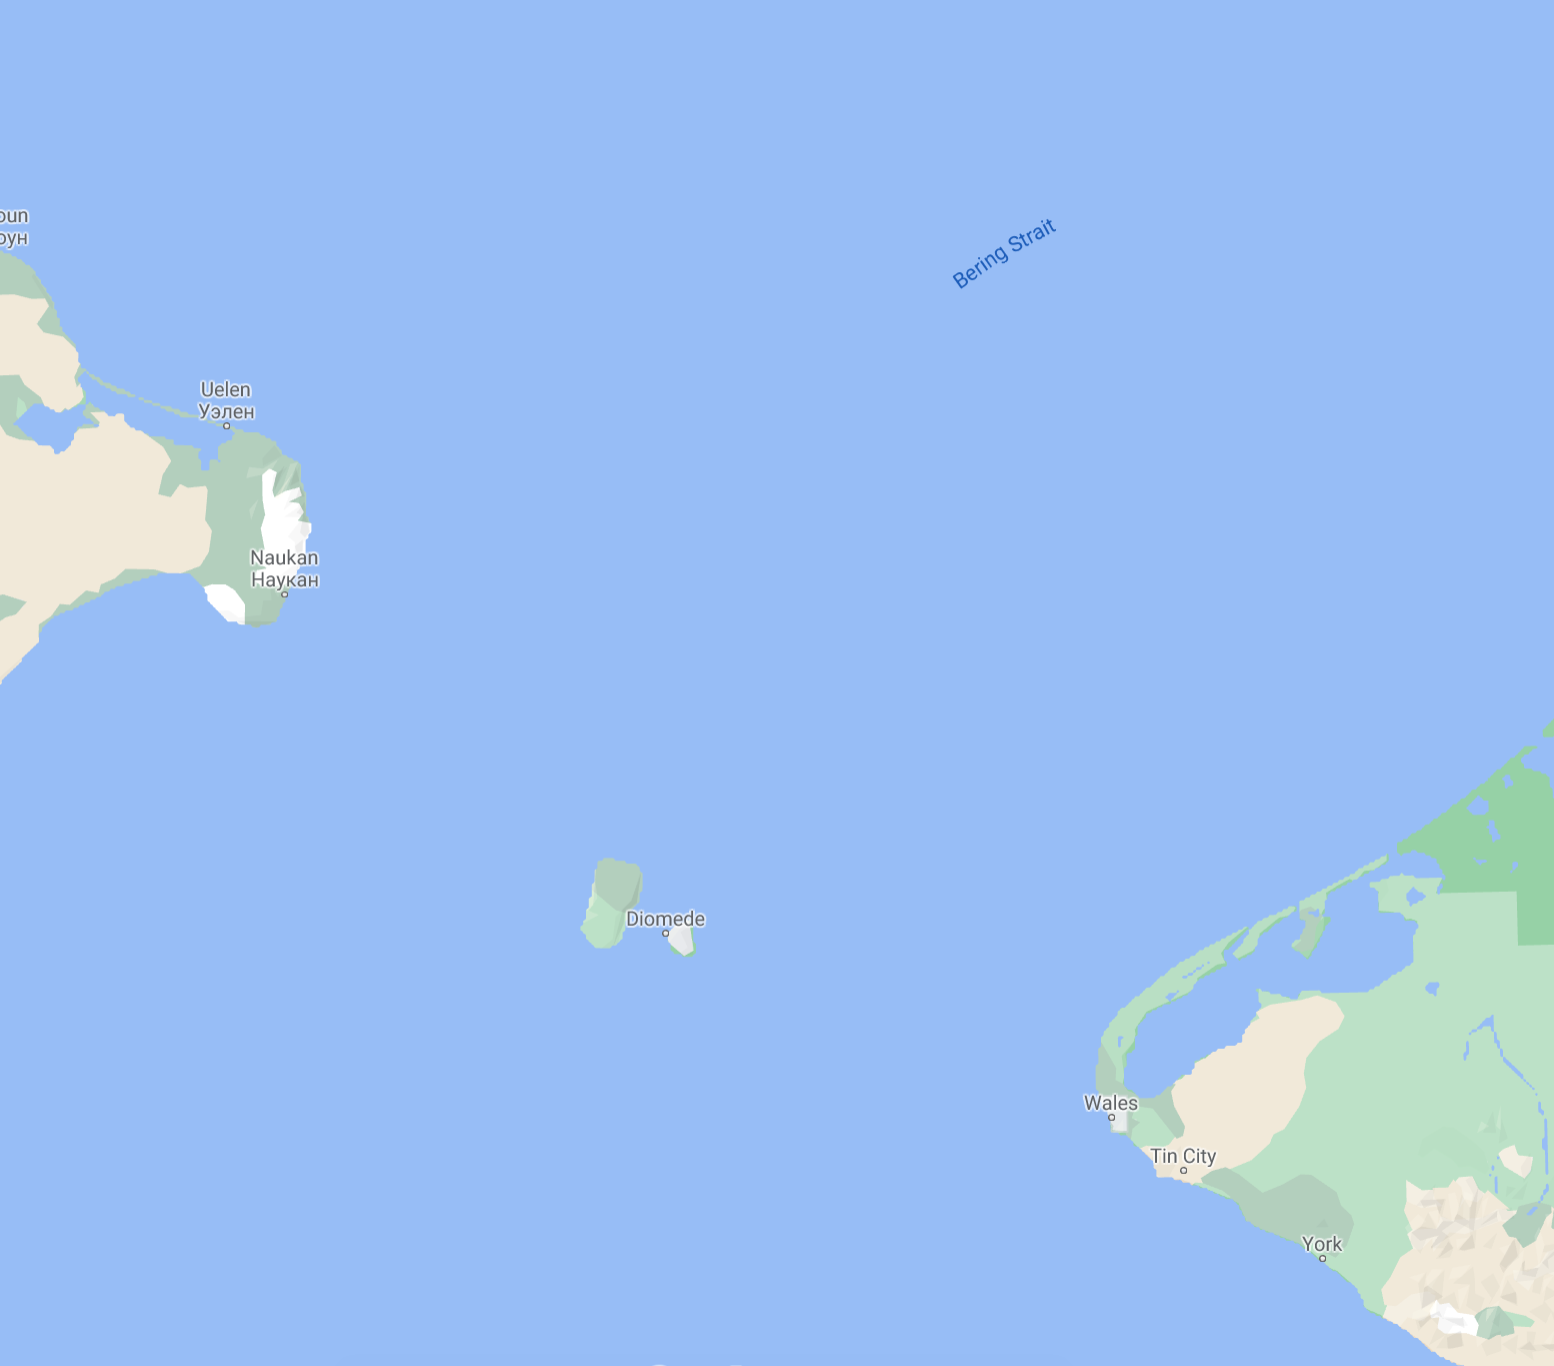 The Diomede islands in the middle of the straight